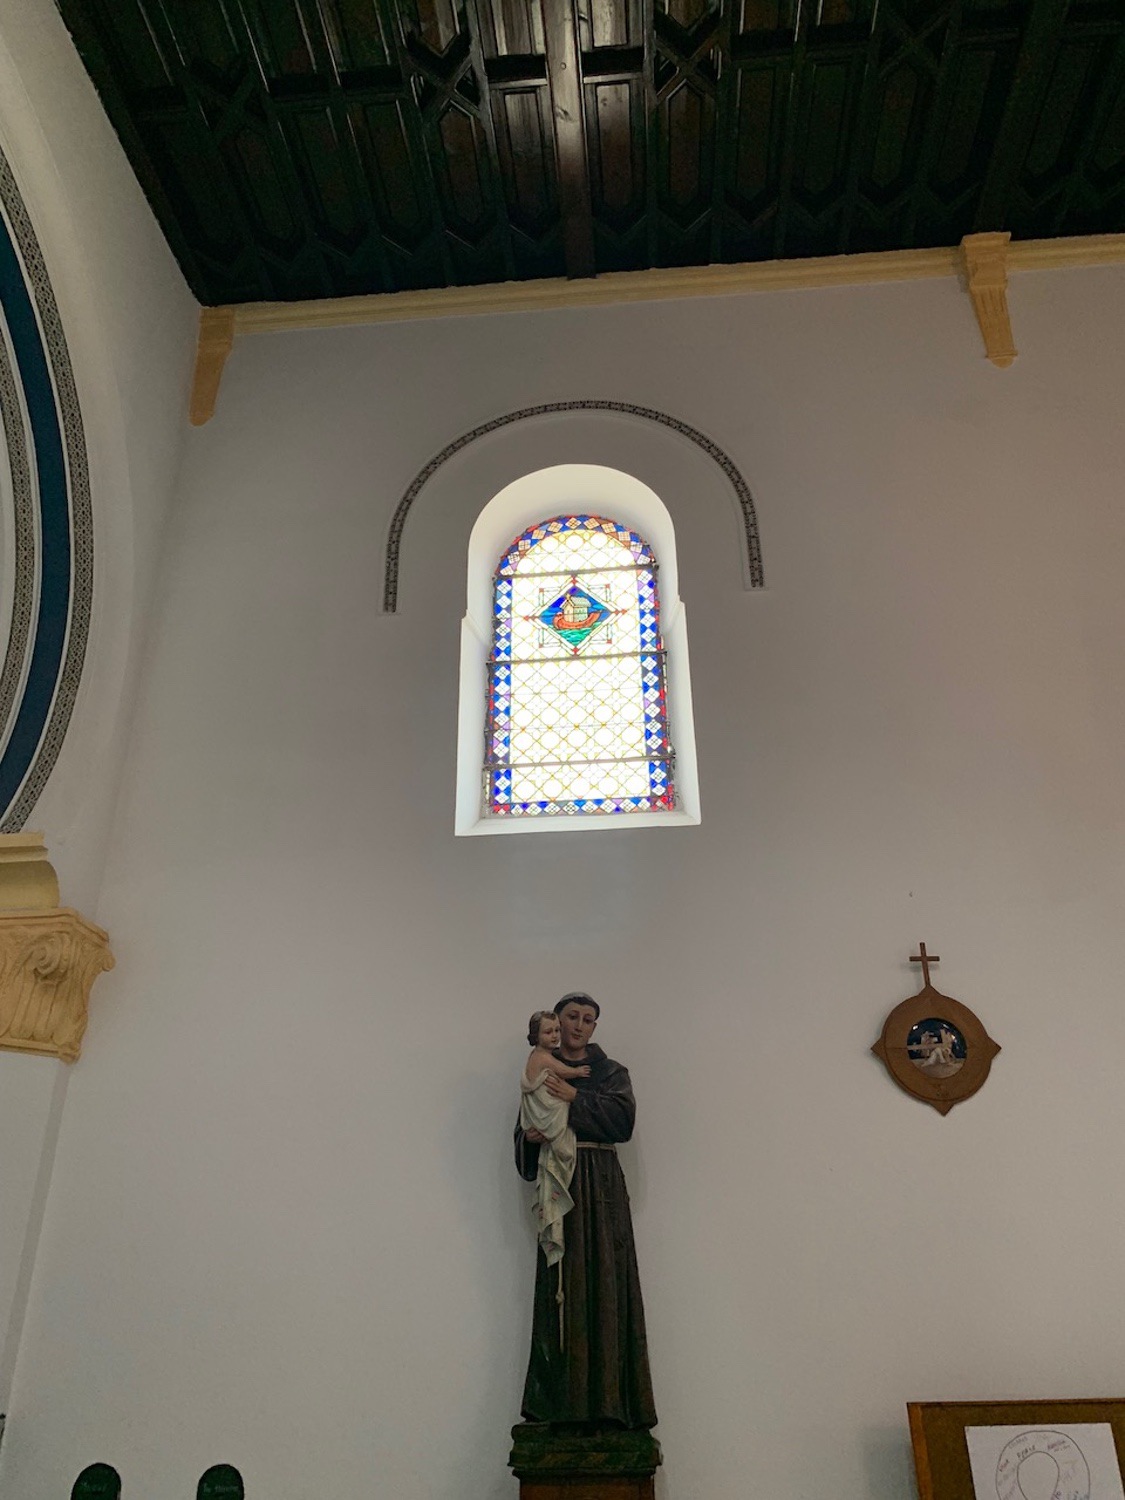 <p>Interior view a stained glass window, under which is a statue of Saint Anthony</p>